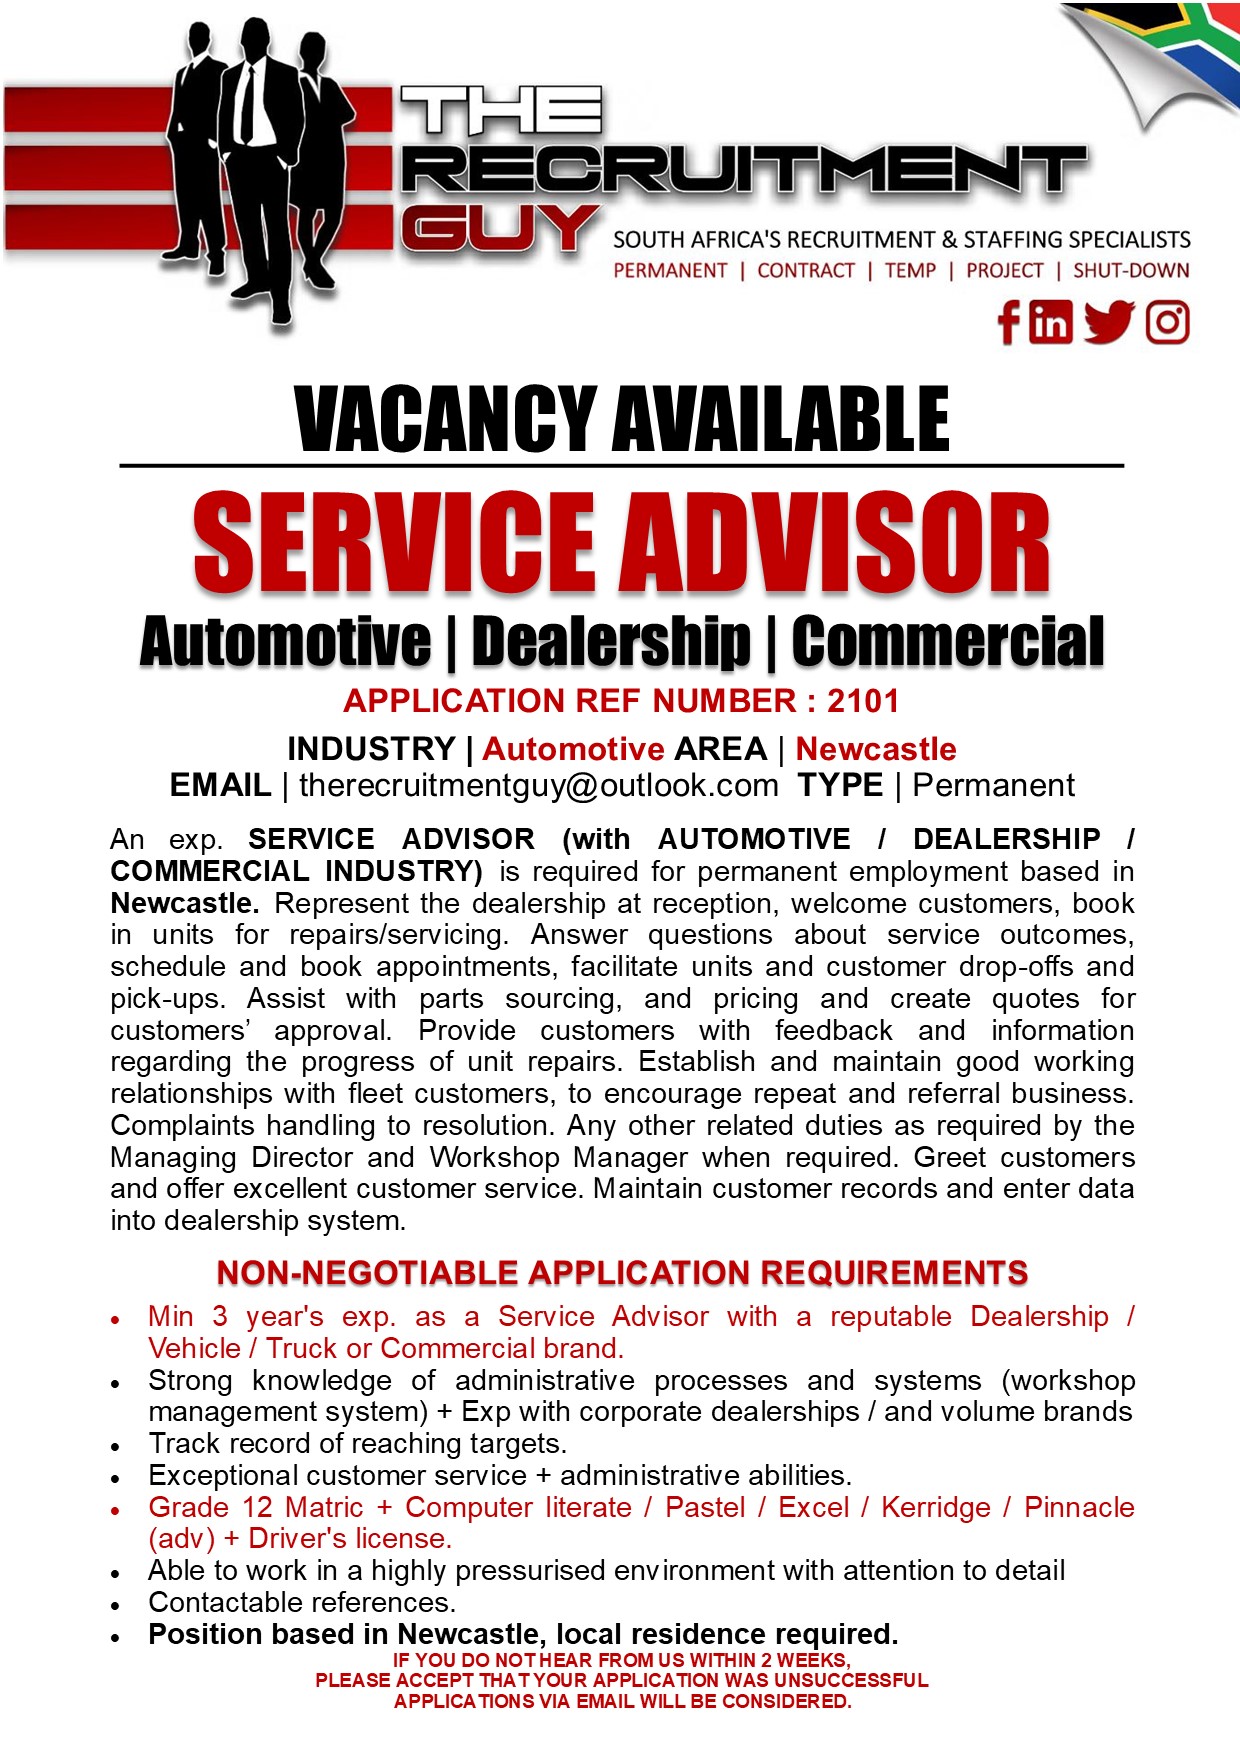 VACANCY AVAILABLE
SERVICE ADVISOR

APPLICATION REF NUMBER : 2101

INDUSTRY | Automotive AREA | Newcastle
EMAIL | therecruitmentguy@outlook.com TYPE | Permanent

An exp. SERVICE ADVISOR (with AUTOMOTIVE / DEALERSHIP /
COMMERCIAL INDUSTRY) is required for permanent employment based in
Newcastle. Represent the dealership at reception, welcome customers, book
in units for repairs/servicing. Answer questions about service outcomes,
schedule and book appointments, facilitate units and customer drop-offs and
pick-ups. Assist with parts sourcing, and pricing and create quotes for
customers’ approval. Provide customers with feedback and information
regarding the progress of unit repairs. Establish and maintain good working
relationships with fleet customers, to encourage repeat and referral business
Complaints handling to resolution. Any other related duties as required by the
Managing Director and Workshop Manager when required. Greet customers
and offer excellent customer service. Maintain customer records and enter data
into dealership system

NON-NEGOTIABLE APPLICATION REQUIREMENTS

« Min 3 year's exp. as a Service Advisor with a reputable Dealership /
Vehicle / Truck or Commercial brand

« Strong knowledge of administrative processes and systems (workshop
management system) + Exp with corporate dealerships / and volume brands

« Track record of reaching targets

« Exceptional customer service + administrative abilities

+ Grade 12 Matric + Computer literate / Pastel / Excel / Kerridge / Pinnacle
(adv) + Driver's license

« Able to work in a highly pressurised environment with attention to detail

« Contactable references

« Position based in Newcastle, local residence required.
IF YOU DO NOTHEAR FROM US WITHIN 2 WEEKS,
PLEASE ACCEPT THAT YOUR APPLICATION WAS UNSUCCESSFUL
APPLICATIONS VIA EMAIL WILL BE CONSIDERED.

GUY SOUTH AFRICA'S RECRUITMENT &amp; STAFFING SPECIALISTS

PERMANENT | CONTRACT | TEMP | PROJECT | SHUT-DOWN

{ink JG]